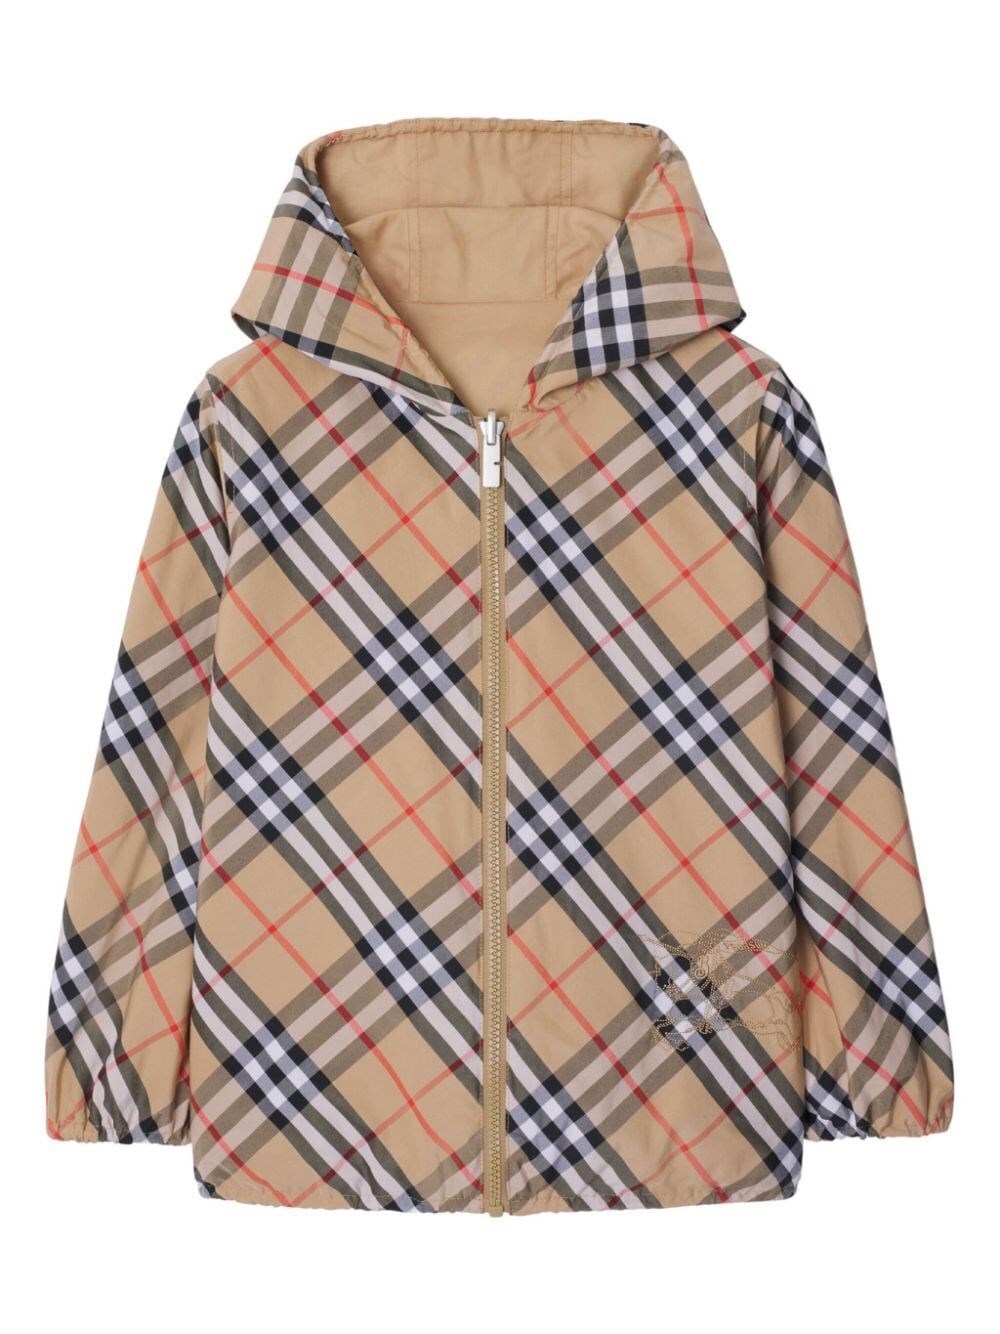 Burberry Kids' Reversible Check Cotton Blend Jacket In Brown